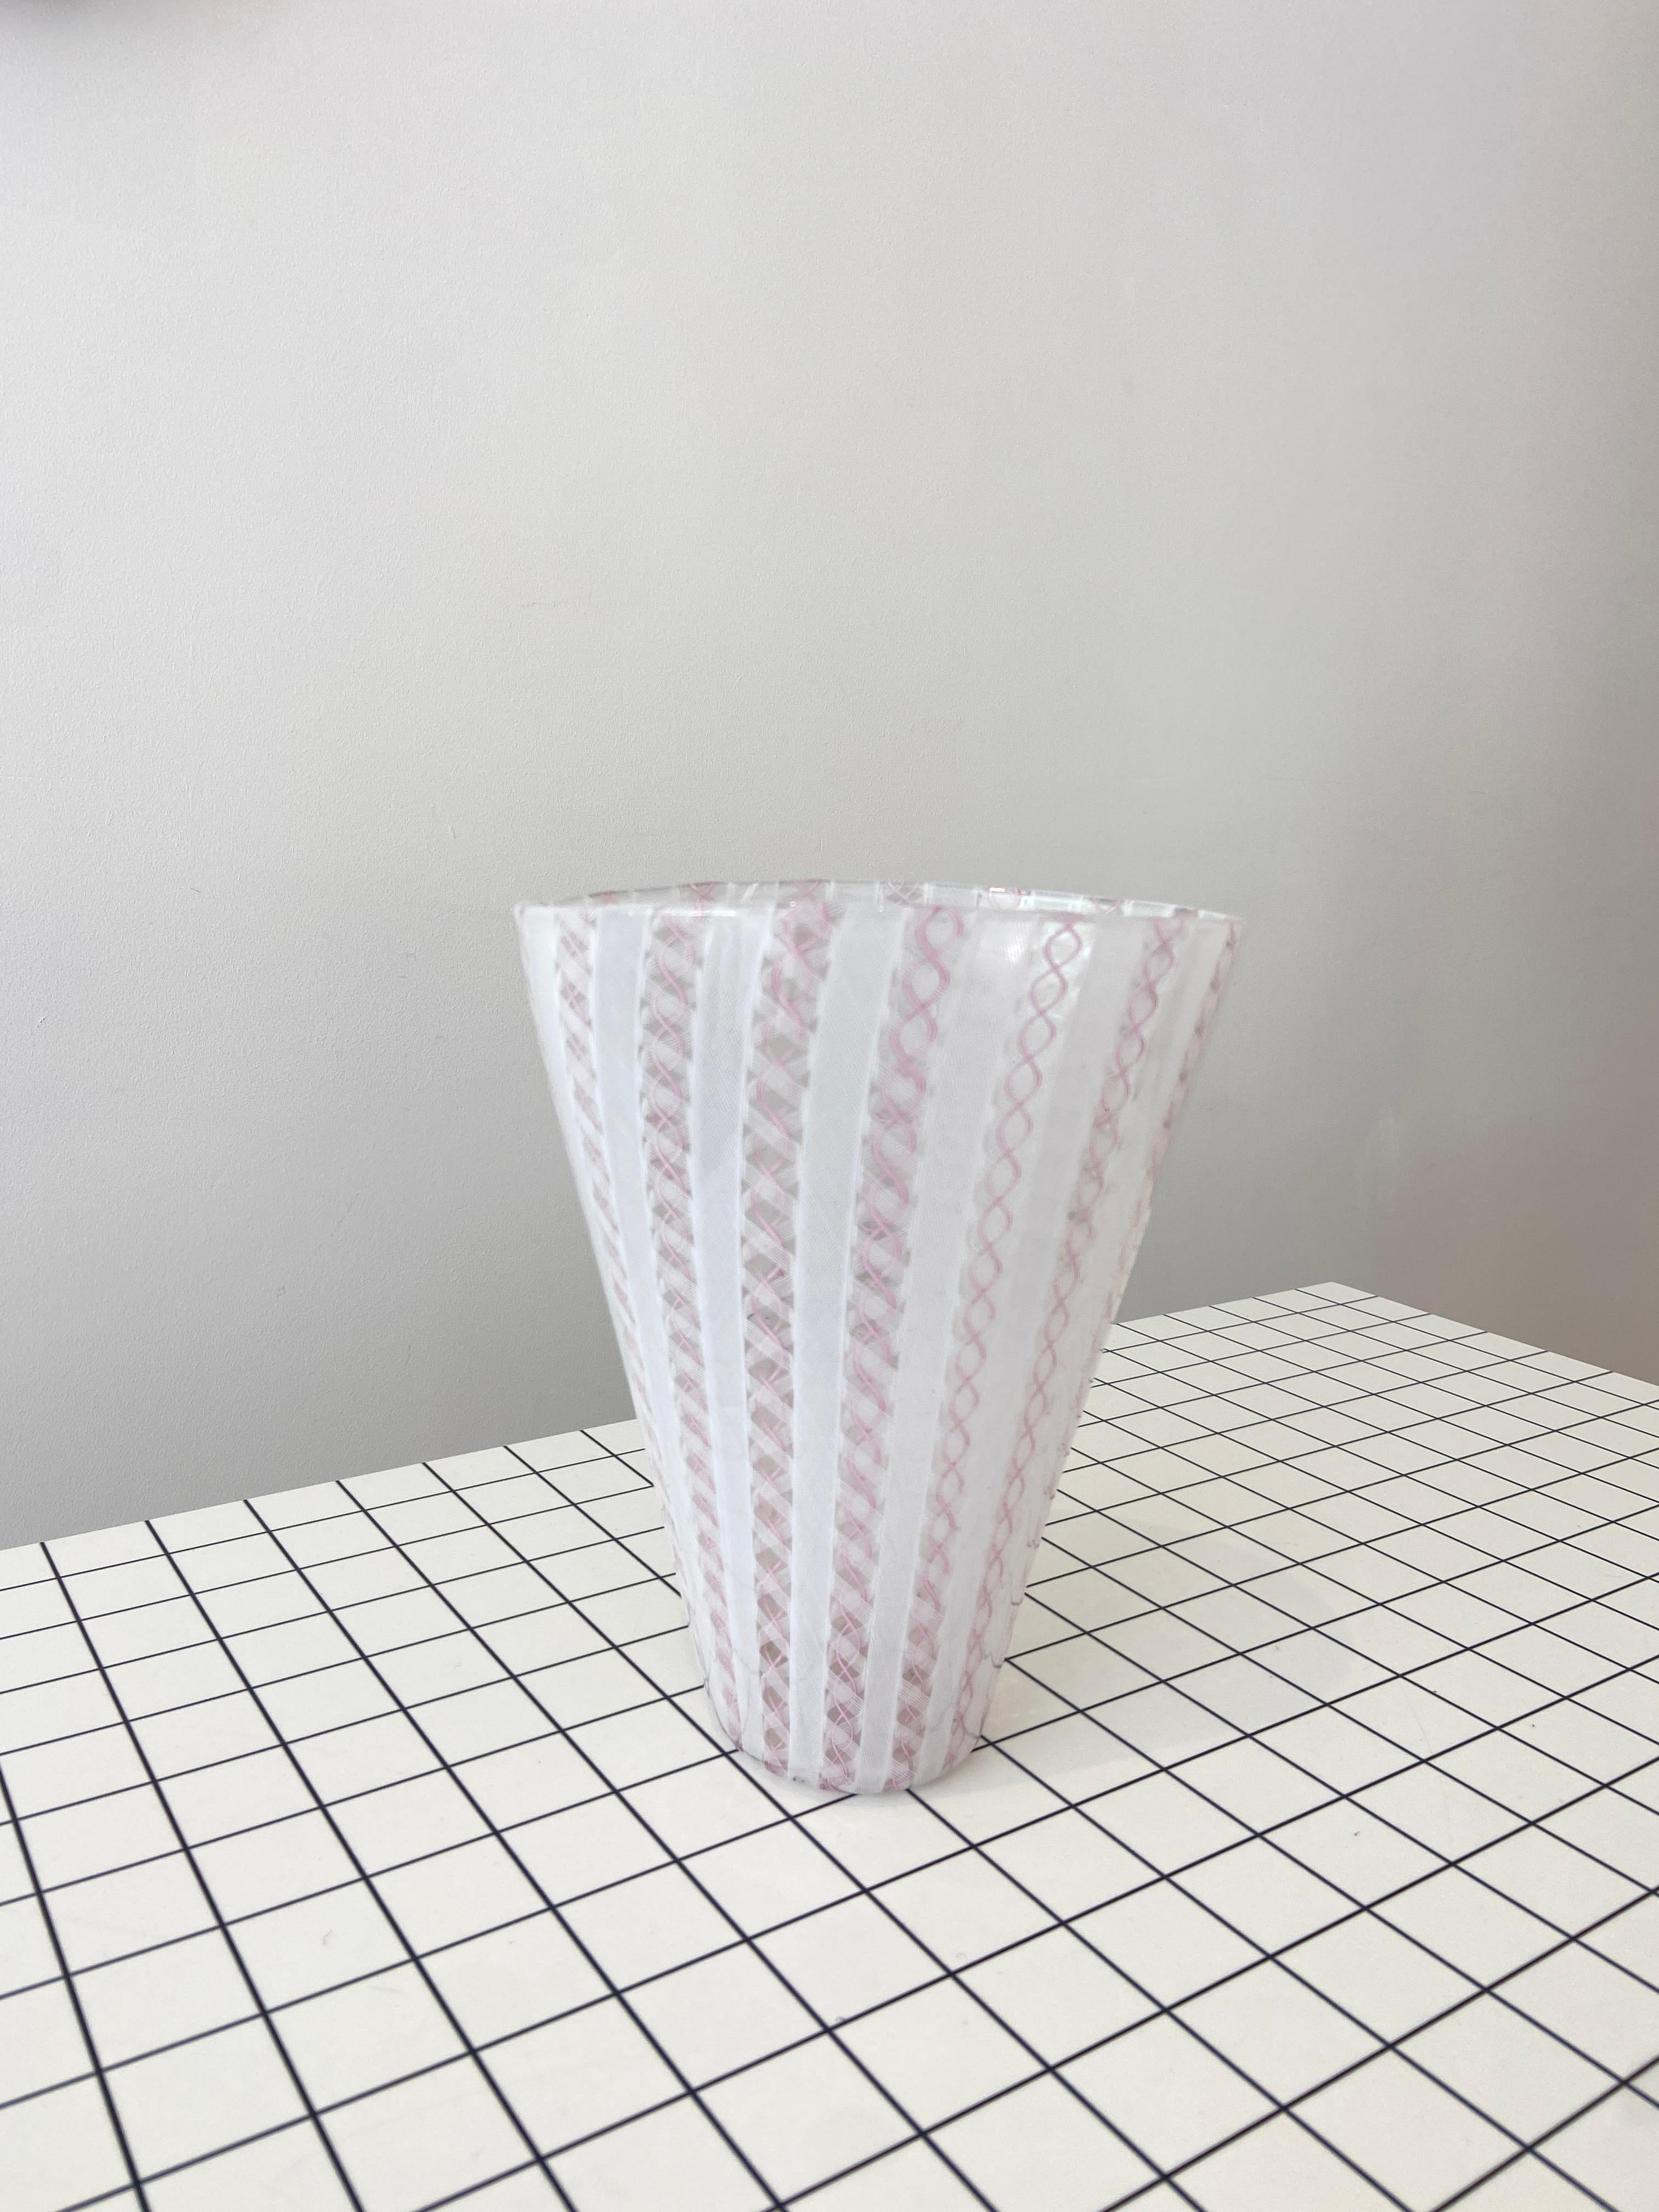 Venini Zanfirico Flared Vase In Excellent Condition For Sale In London, England